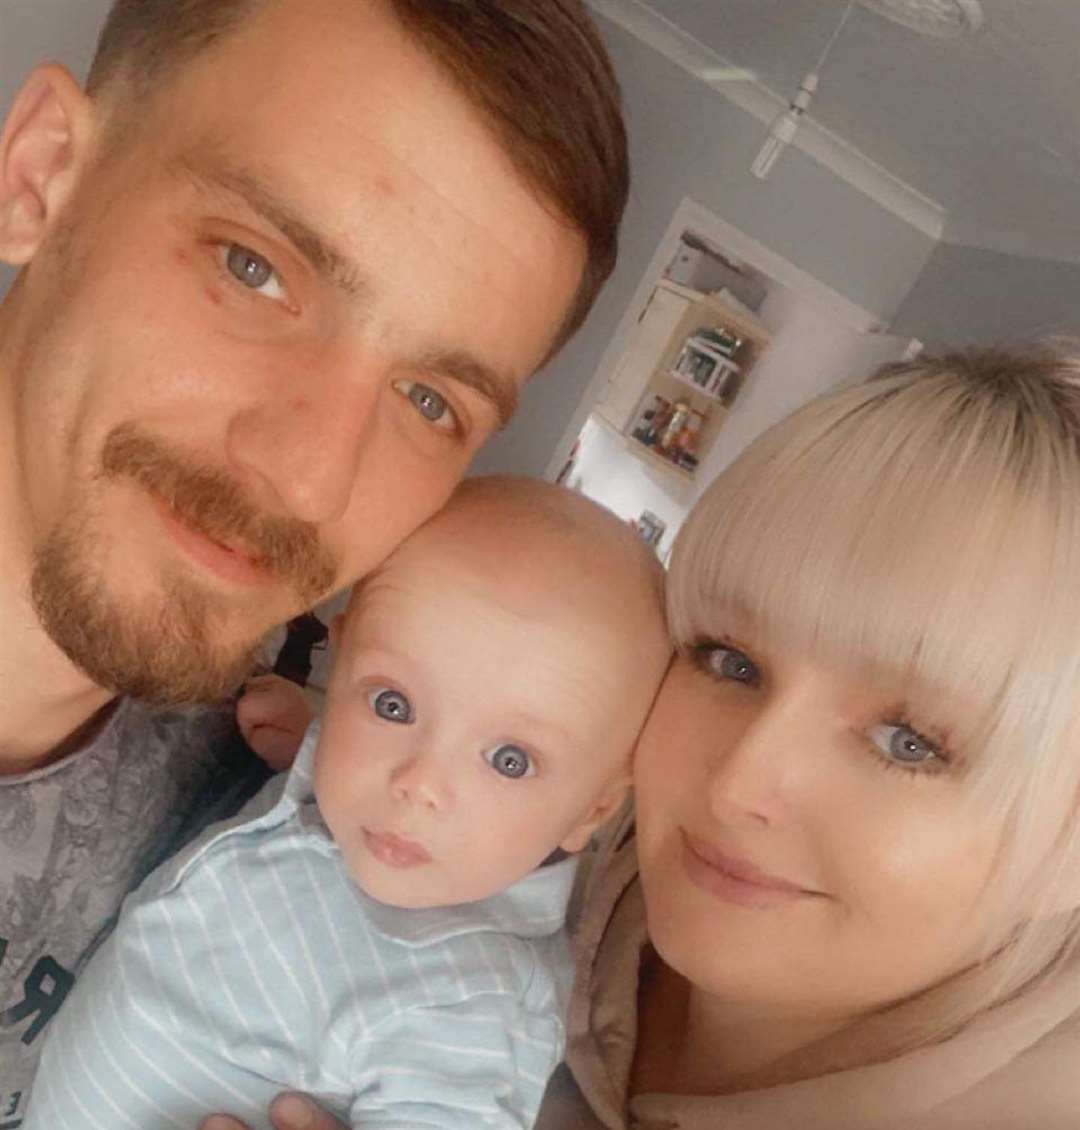 Holly-Louise Mackie and Liam Arbon-Davis with baby Brodie. Picture: SWNS